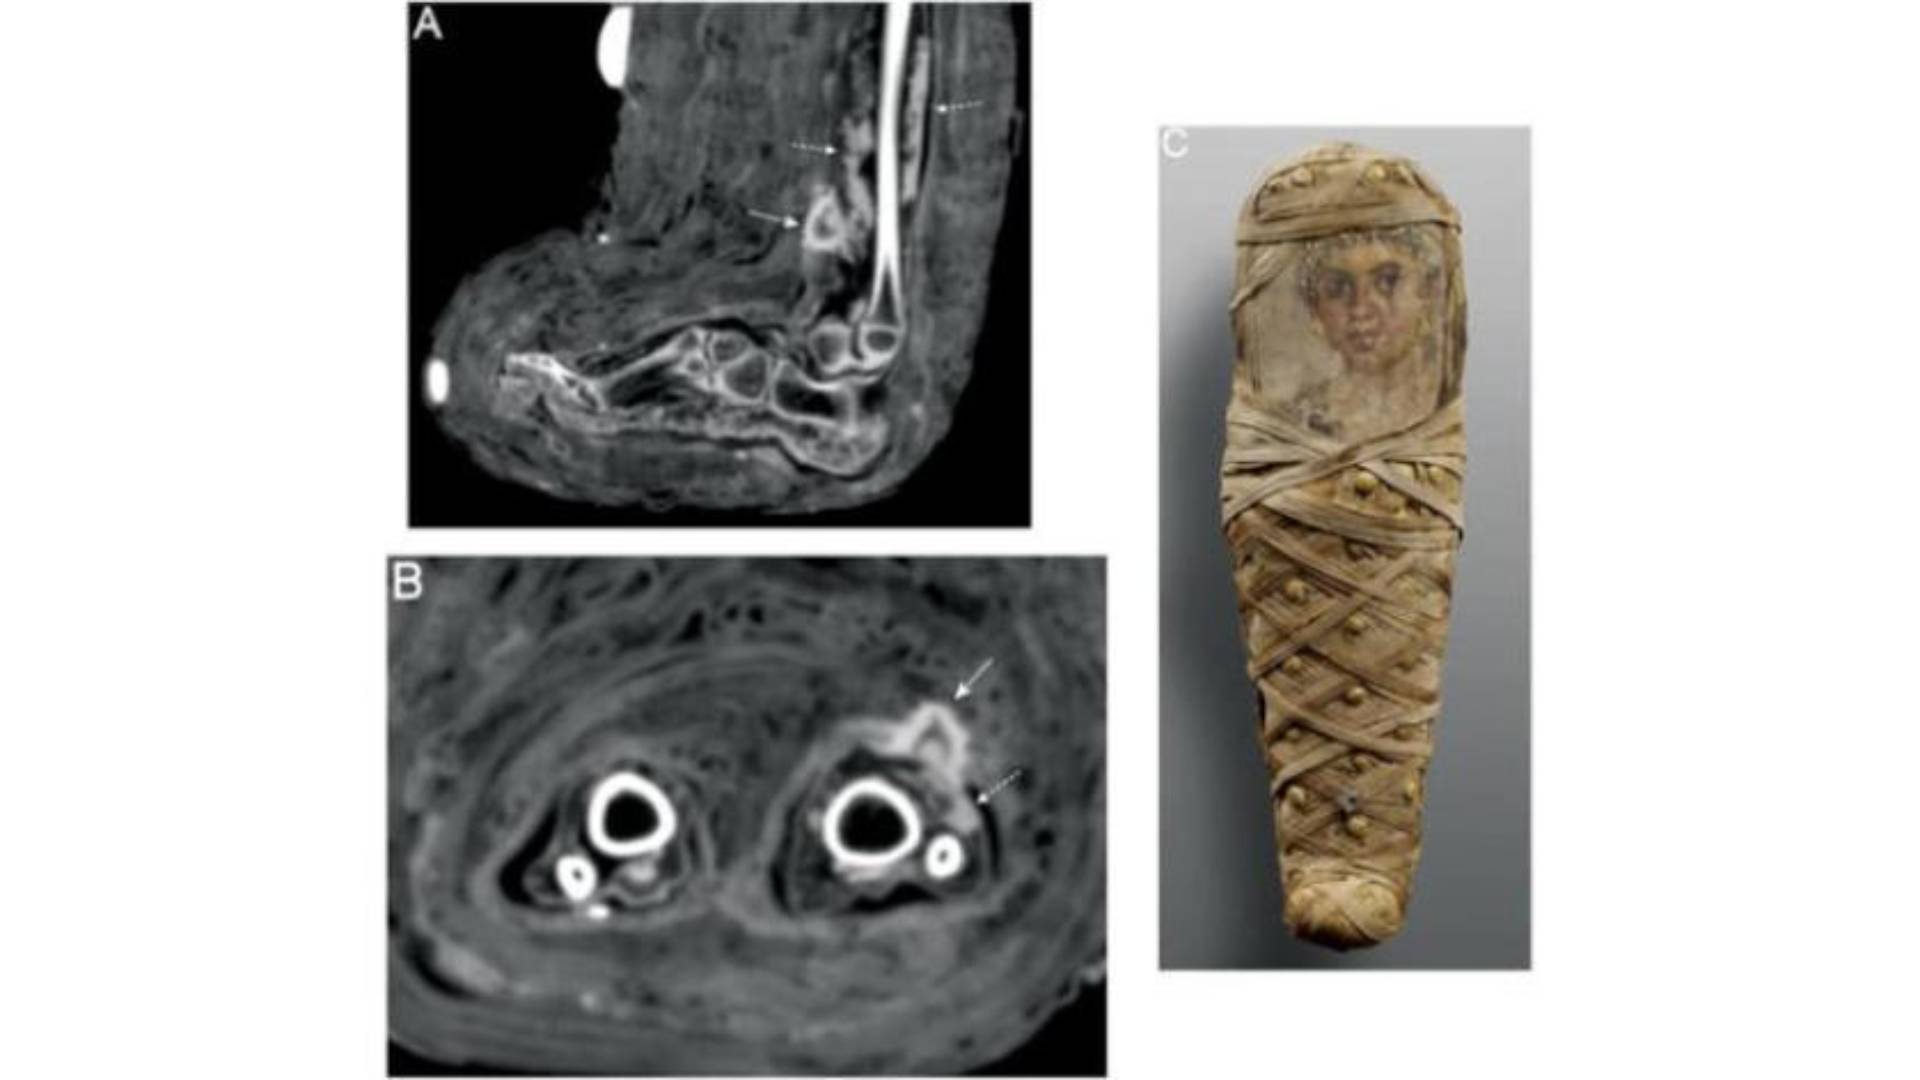  An international research team from Germany, Italy and the US have announced the first-ever discovery of an ancient Egyptian dressing. (International Journal of Paleopathology)